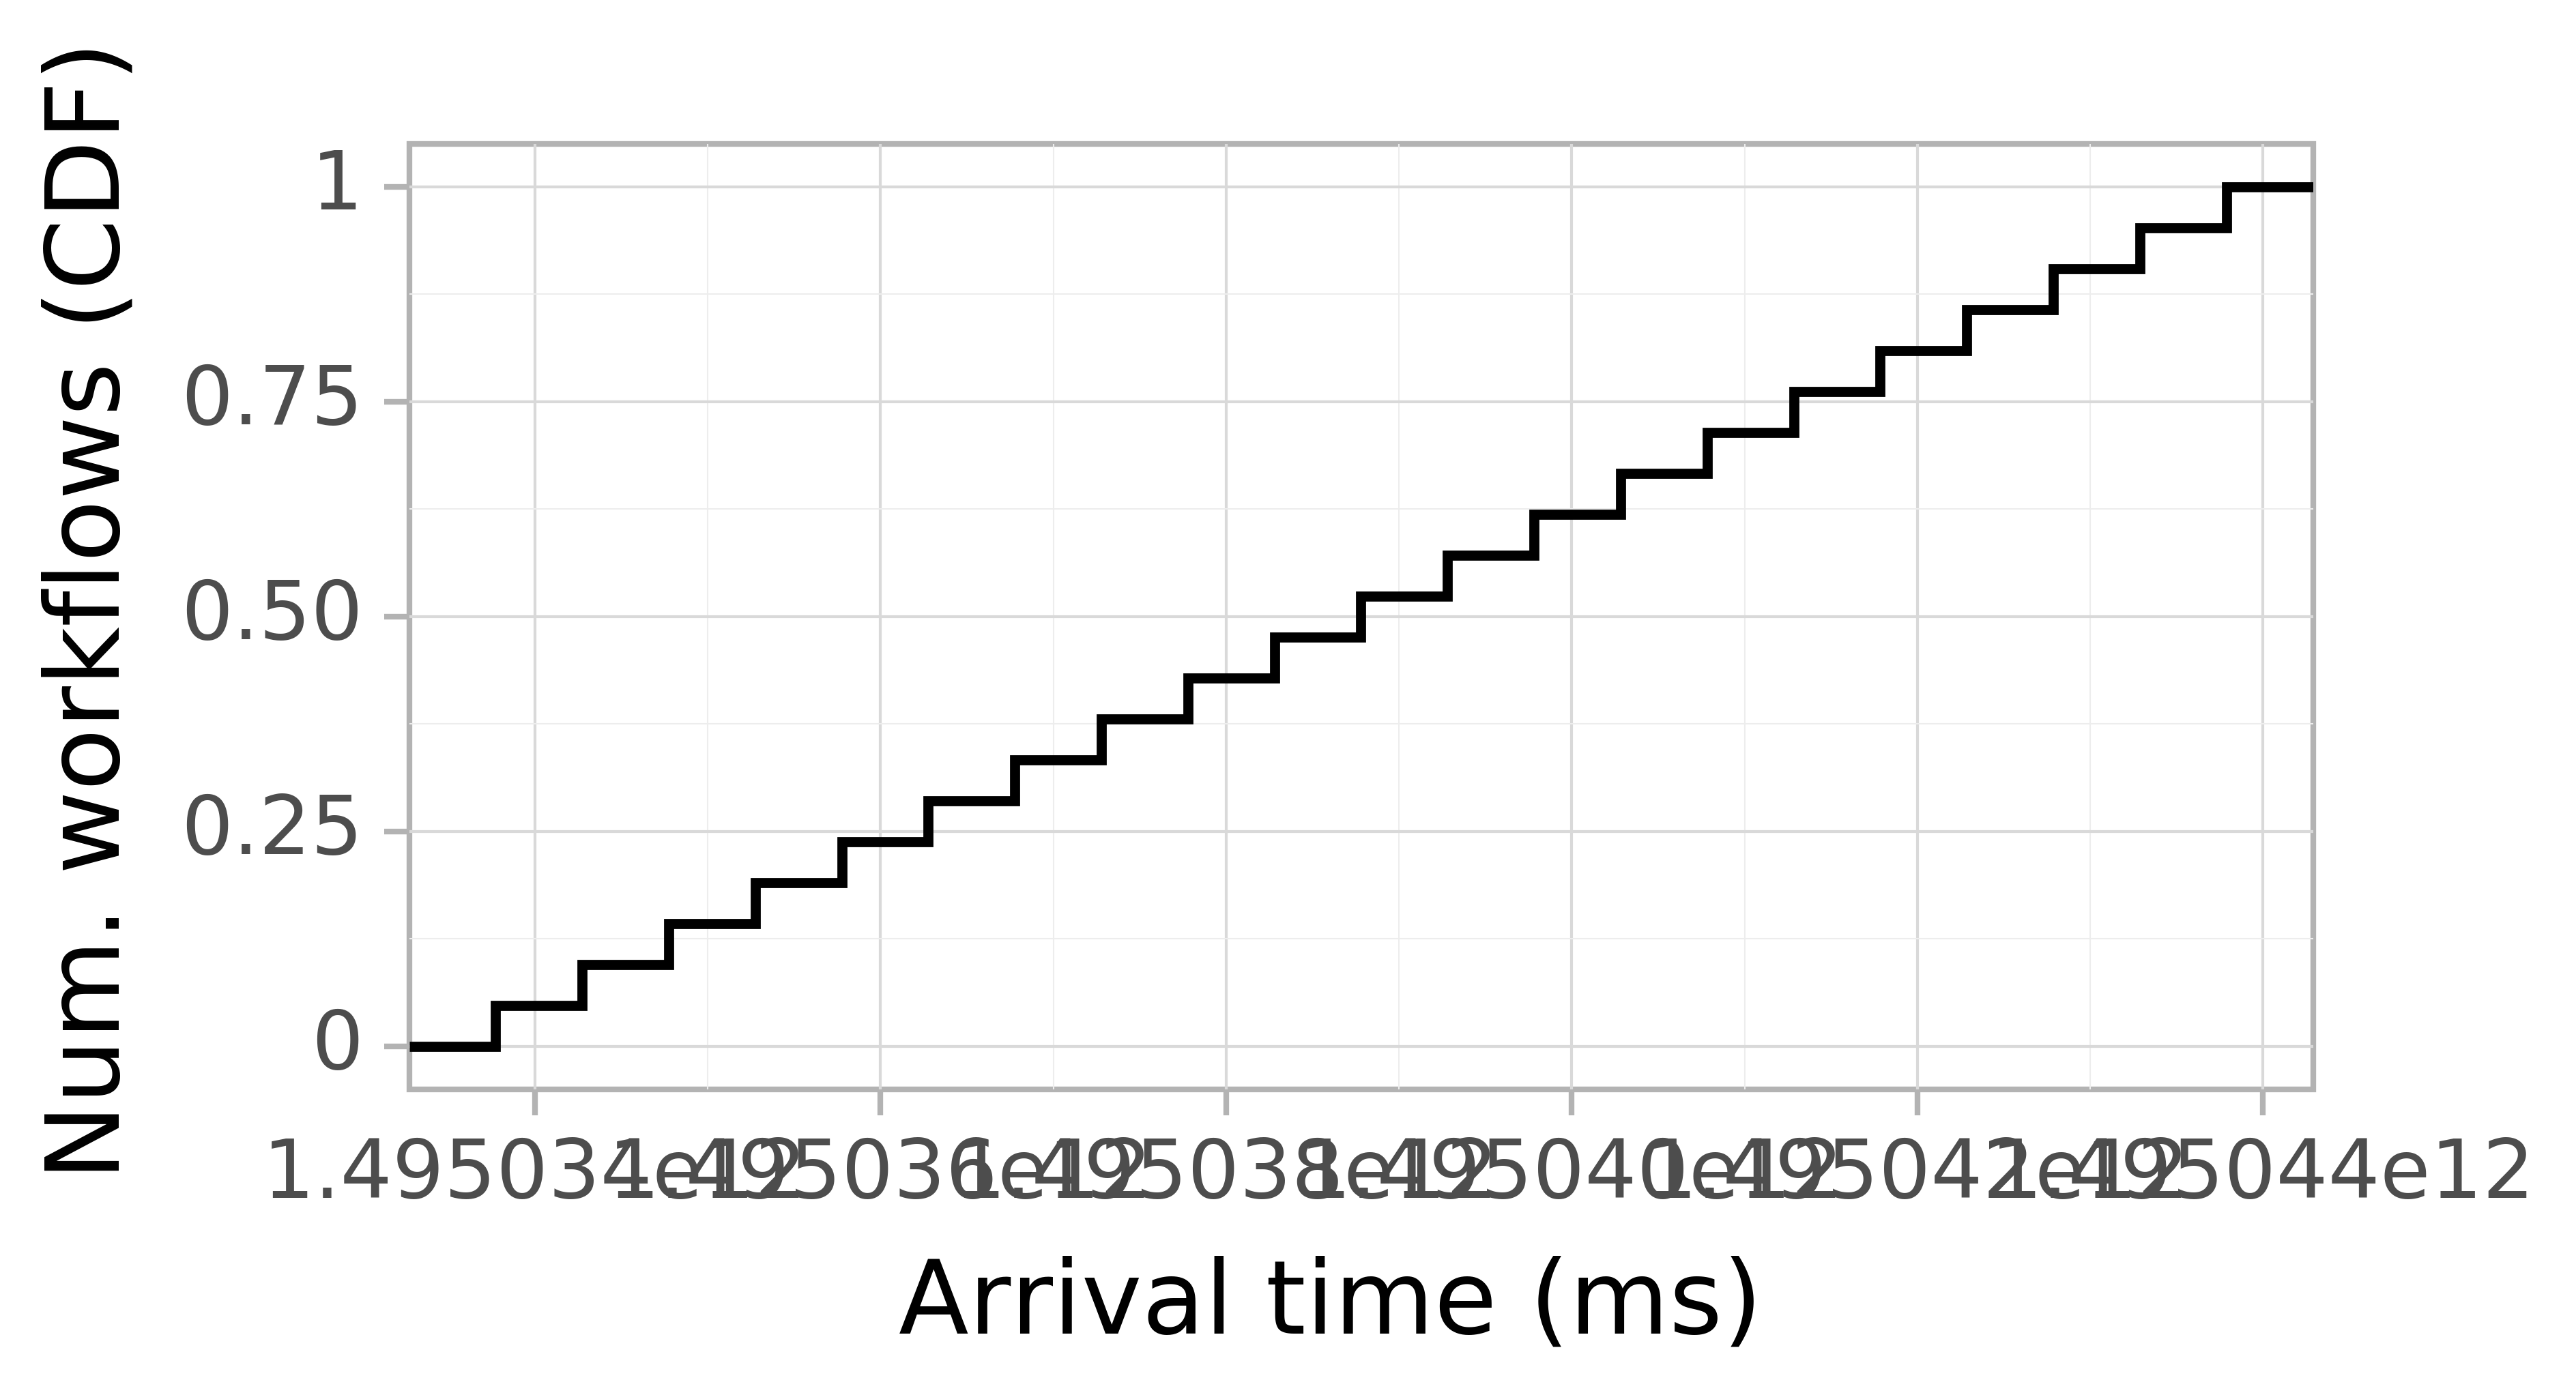 Job arrival CDF graph for the askalon-new_ee61 trace.